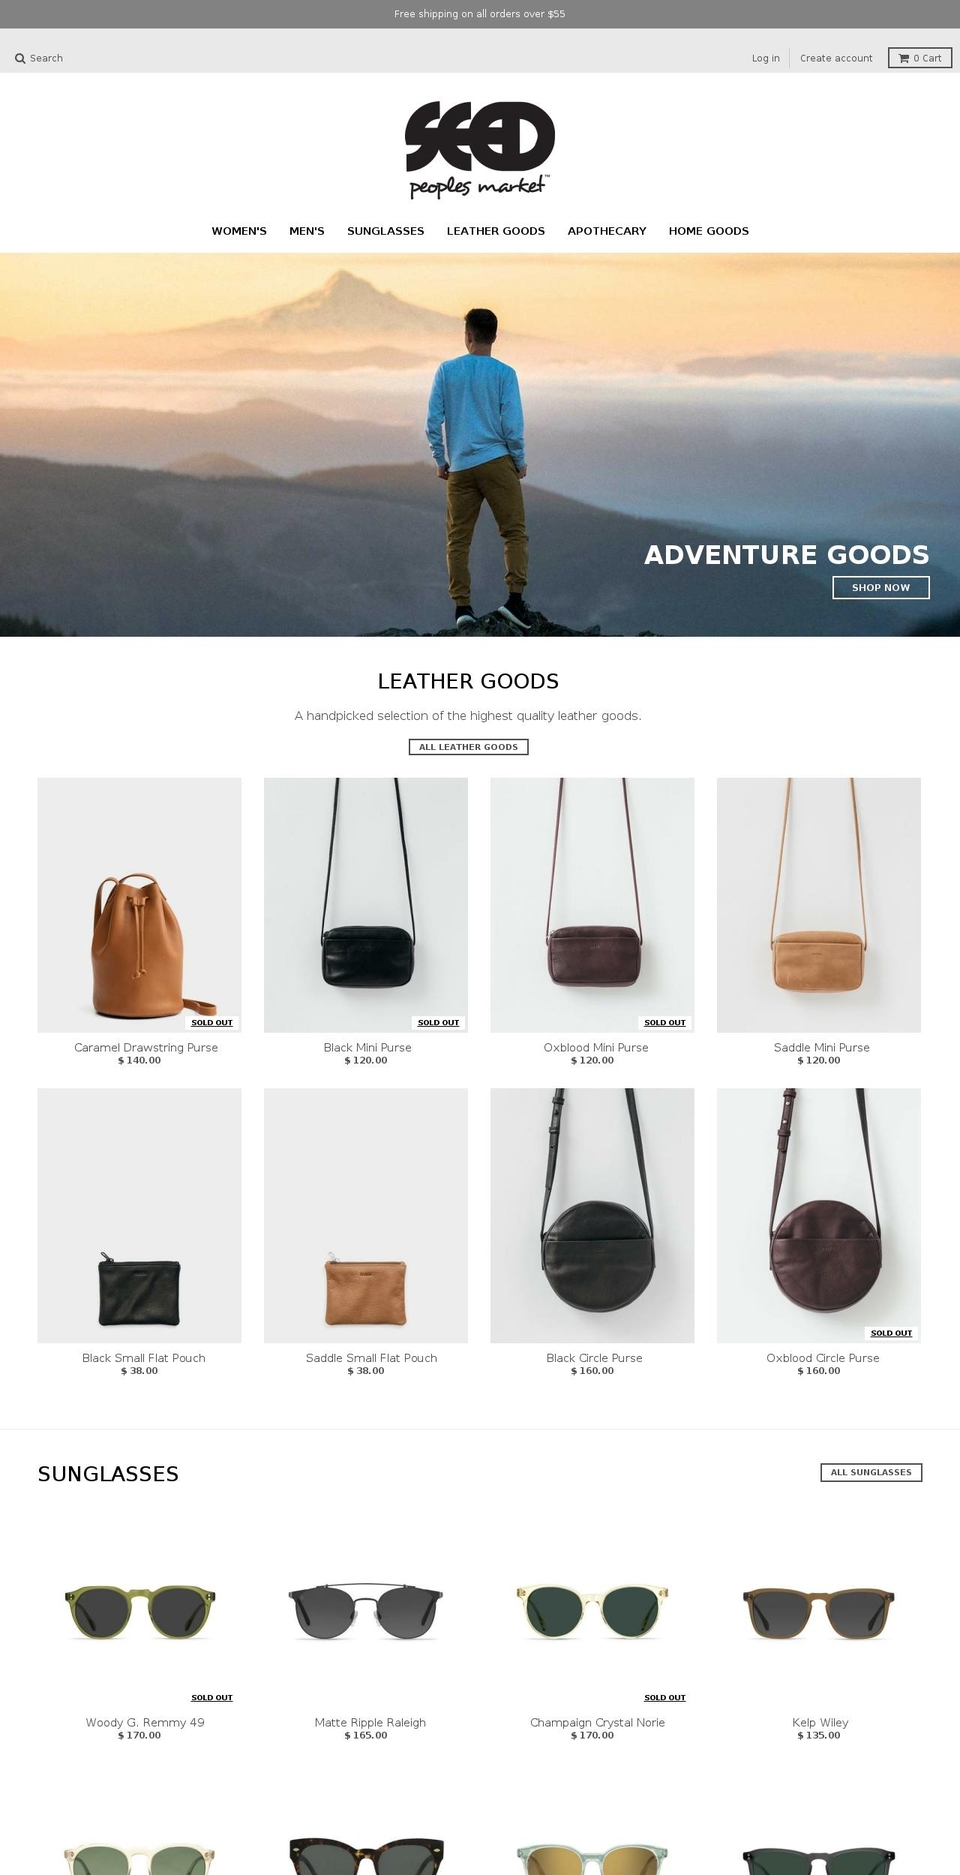 District Shopify theme site example seedpeoplesmarket.com